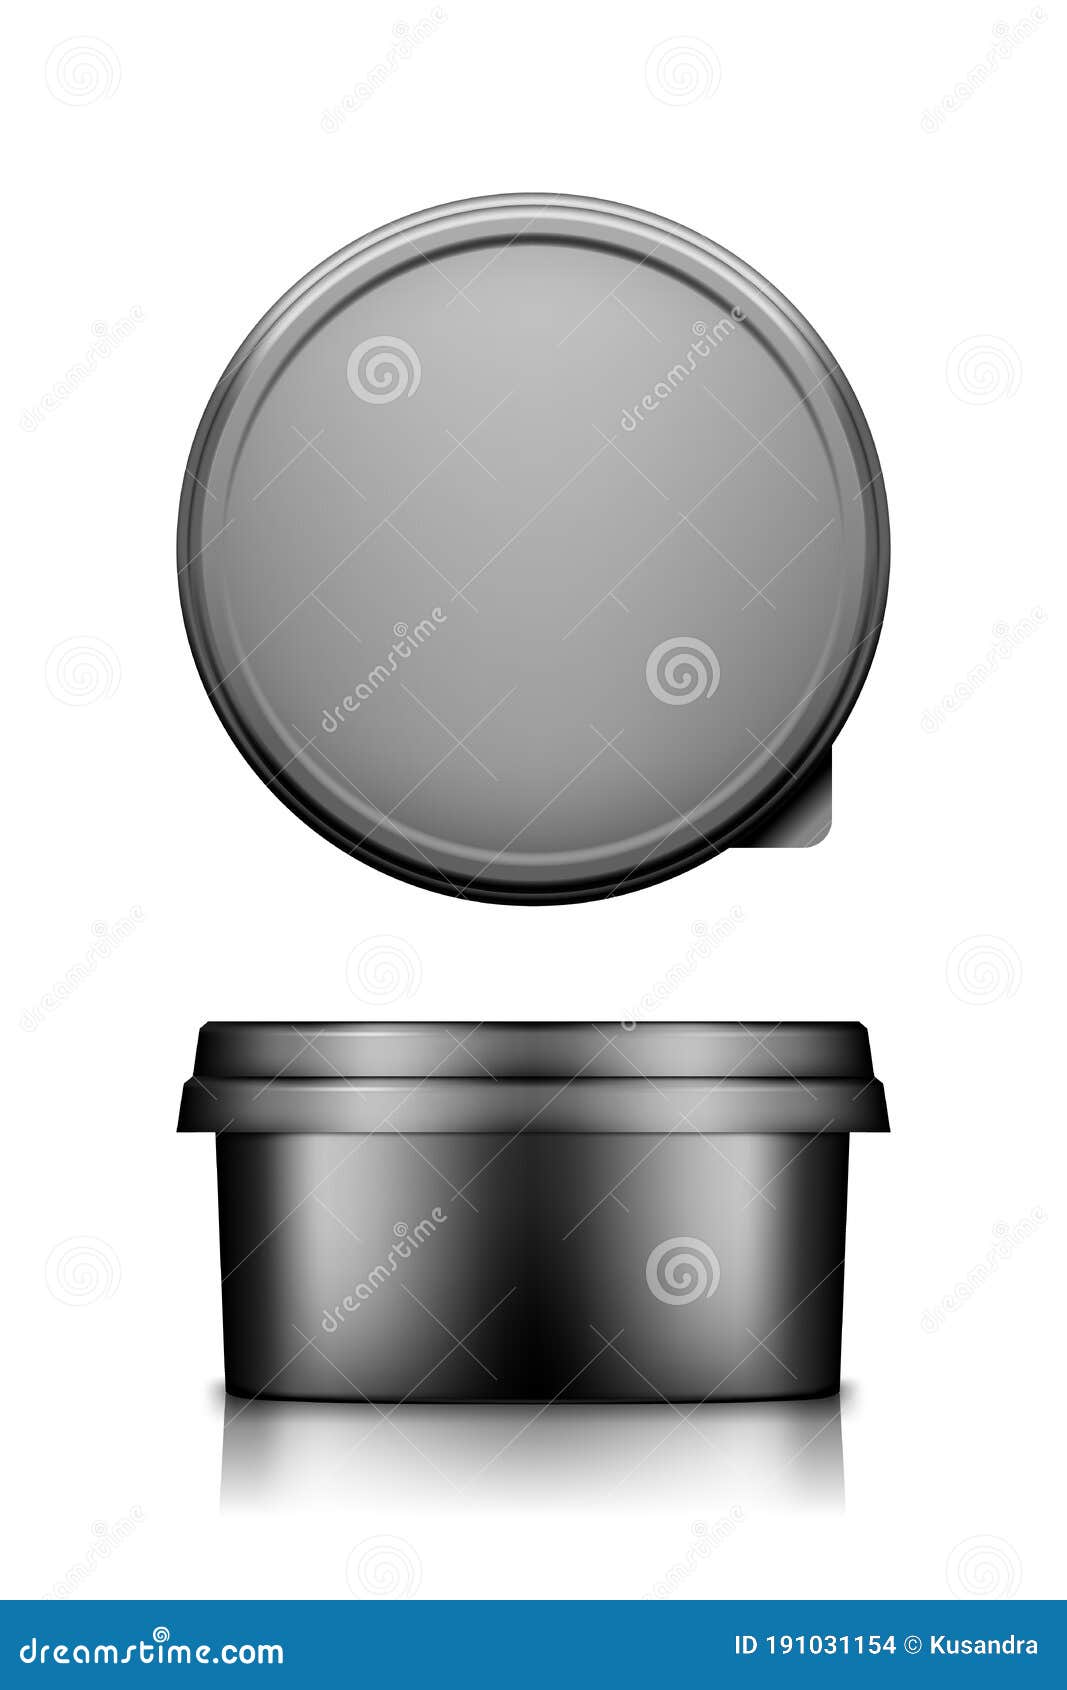 Download Black Cheese, Butter Or Margarine Round Container With Lid Mockup - Front And Top View Stock ...